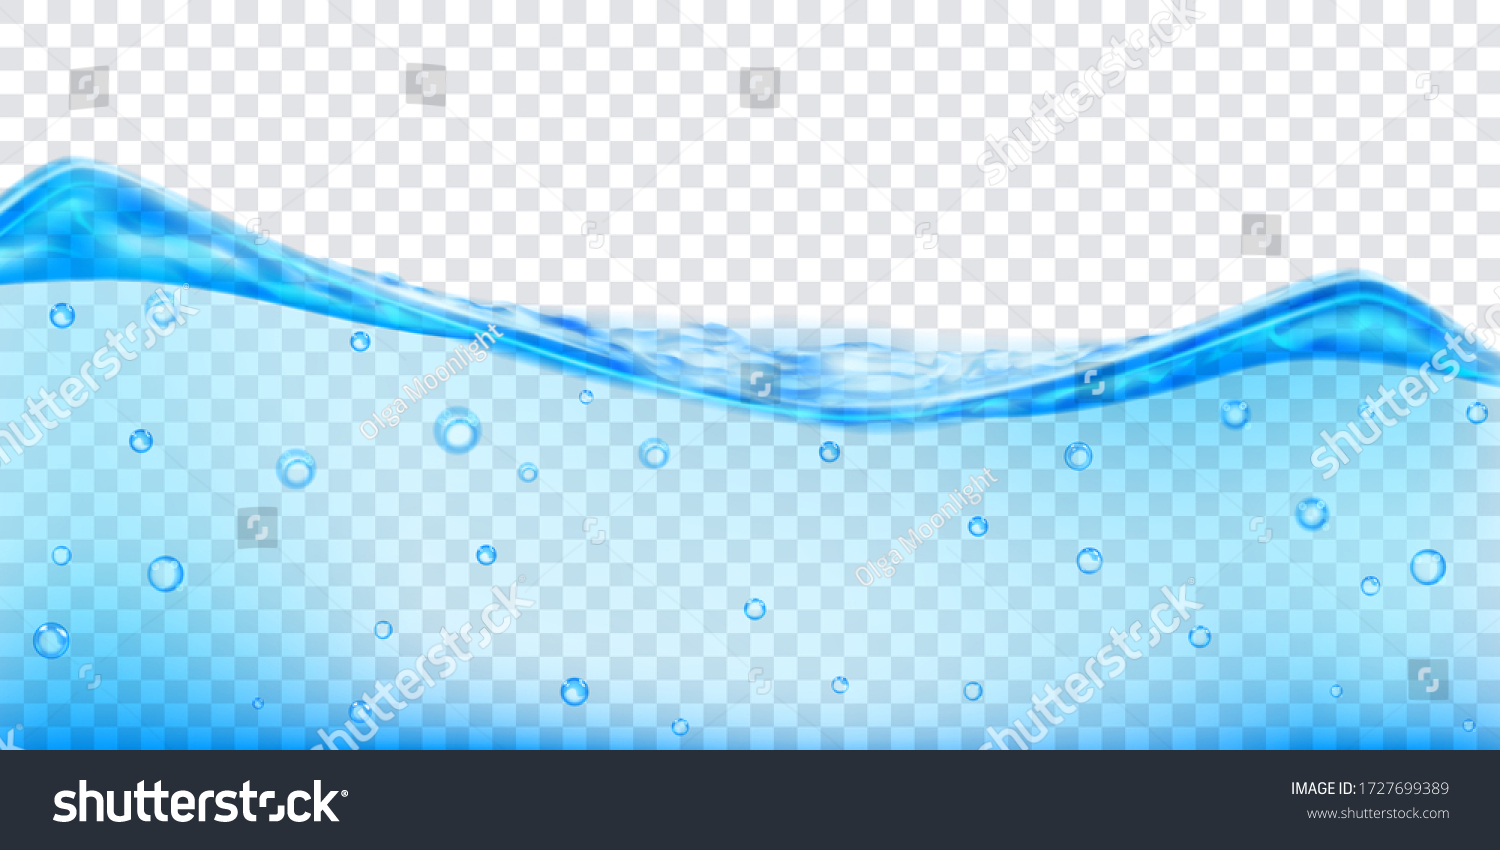 Translucent water wave in light blue colors with air bubbles, isolated on transparent background. Transparency only in vector file #1727699389